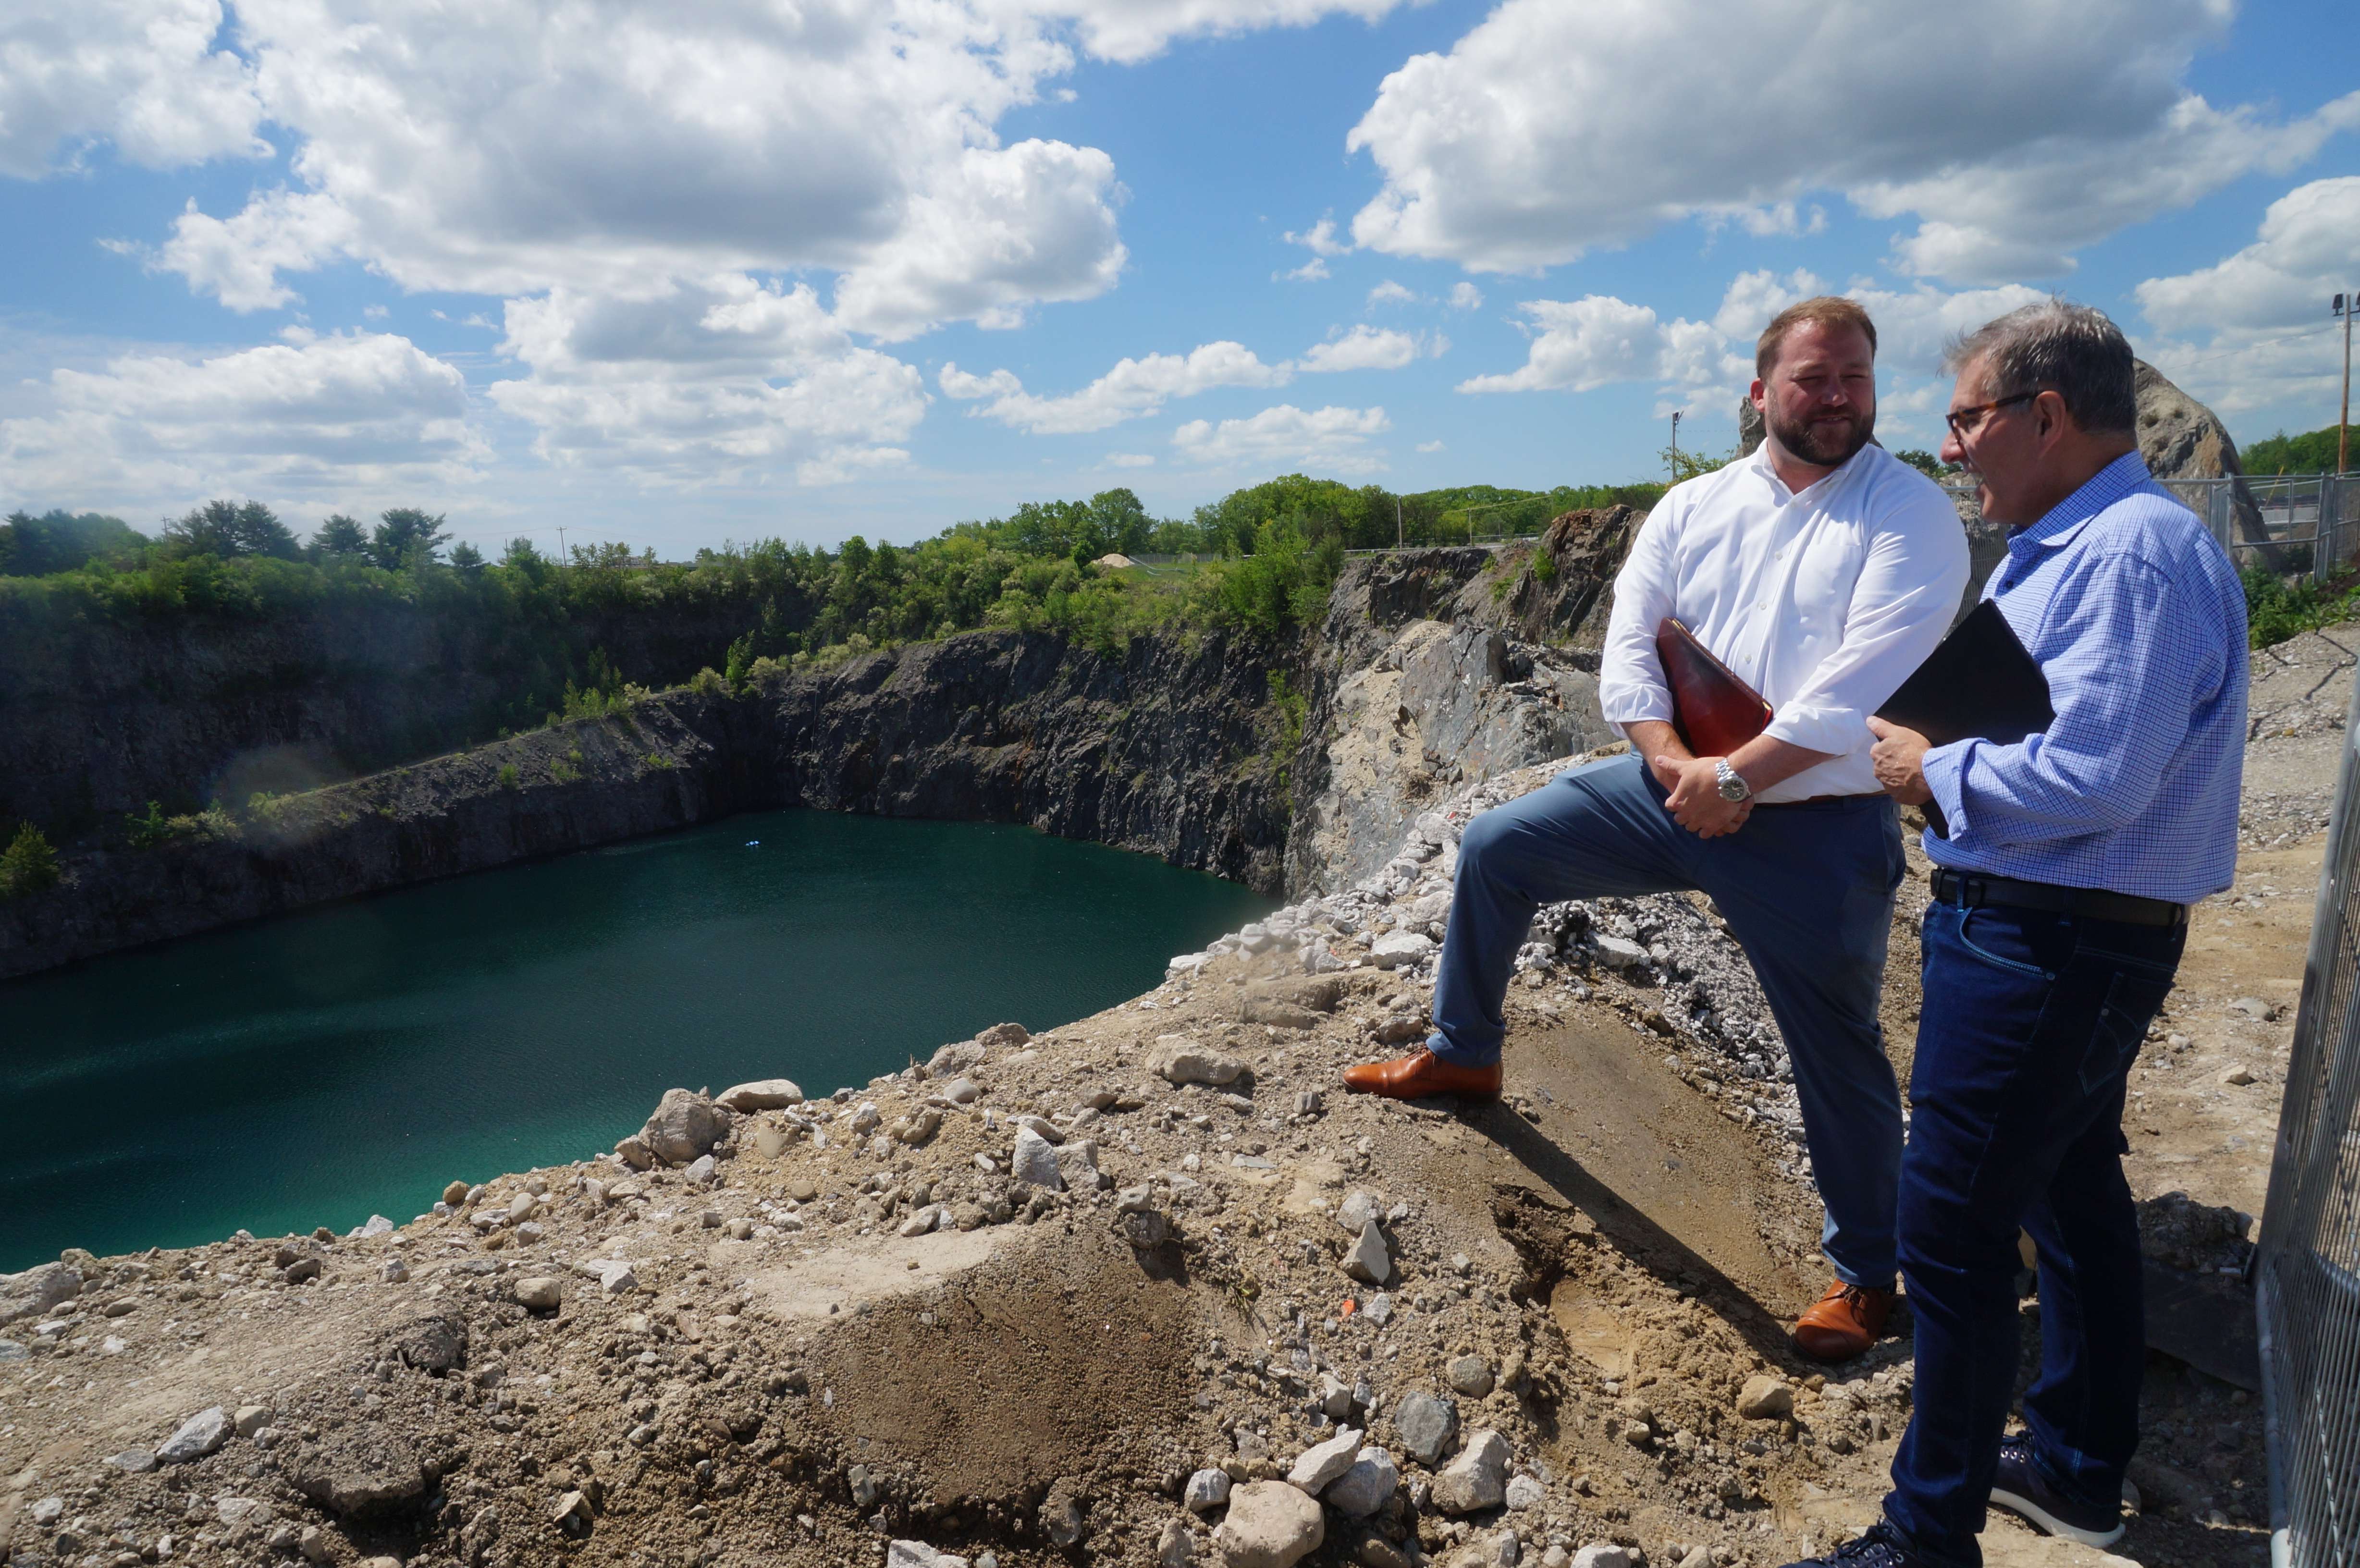 two men, both white, one with a beard, stand on the edge of a deep quarry with brigh green water at the bottom